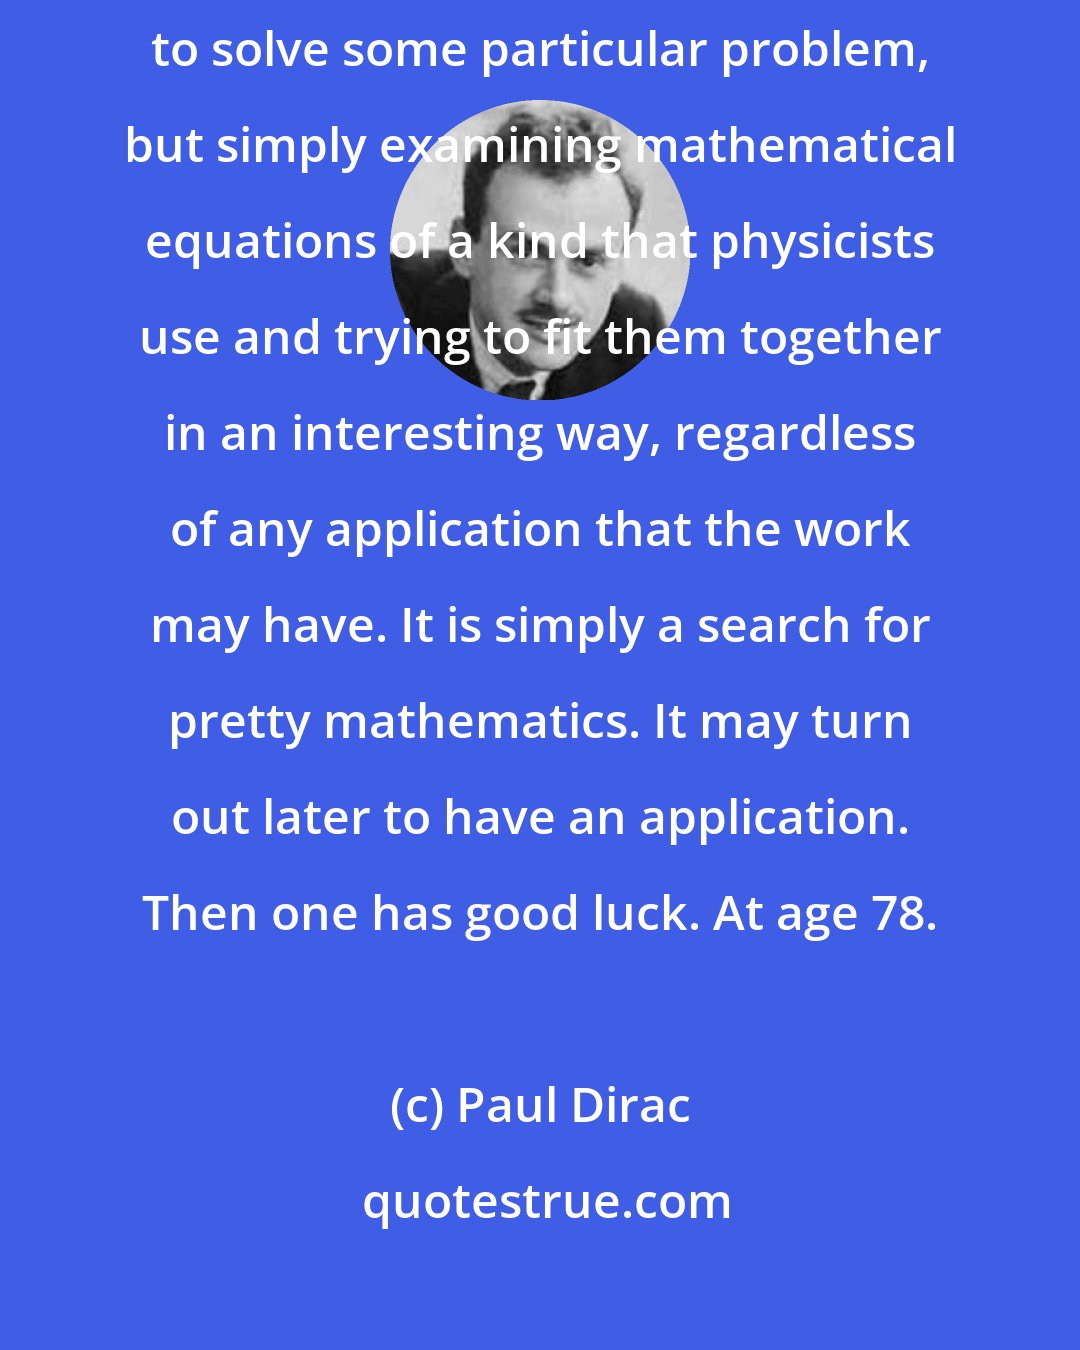 Paul Dirac: A good deal of my research in physics has consisted in not setting out to solve some particular problem, but simply examining mathematical equations of a kind that physicists use and trying to fit them together in an interesting way, regardless of any application that the work may have. It is simply a search for pretty mathematics. It may turn out later to have an application. Then one has good luck. At age 78.